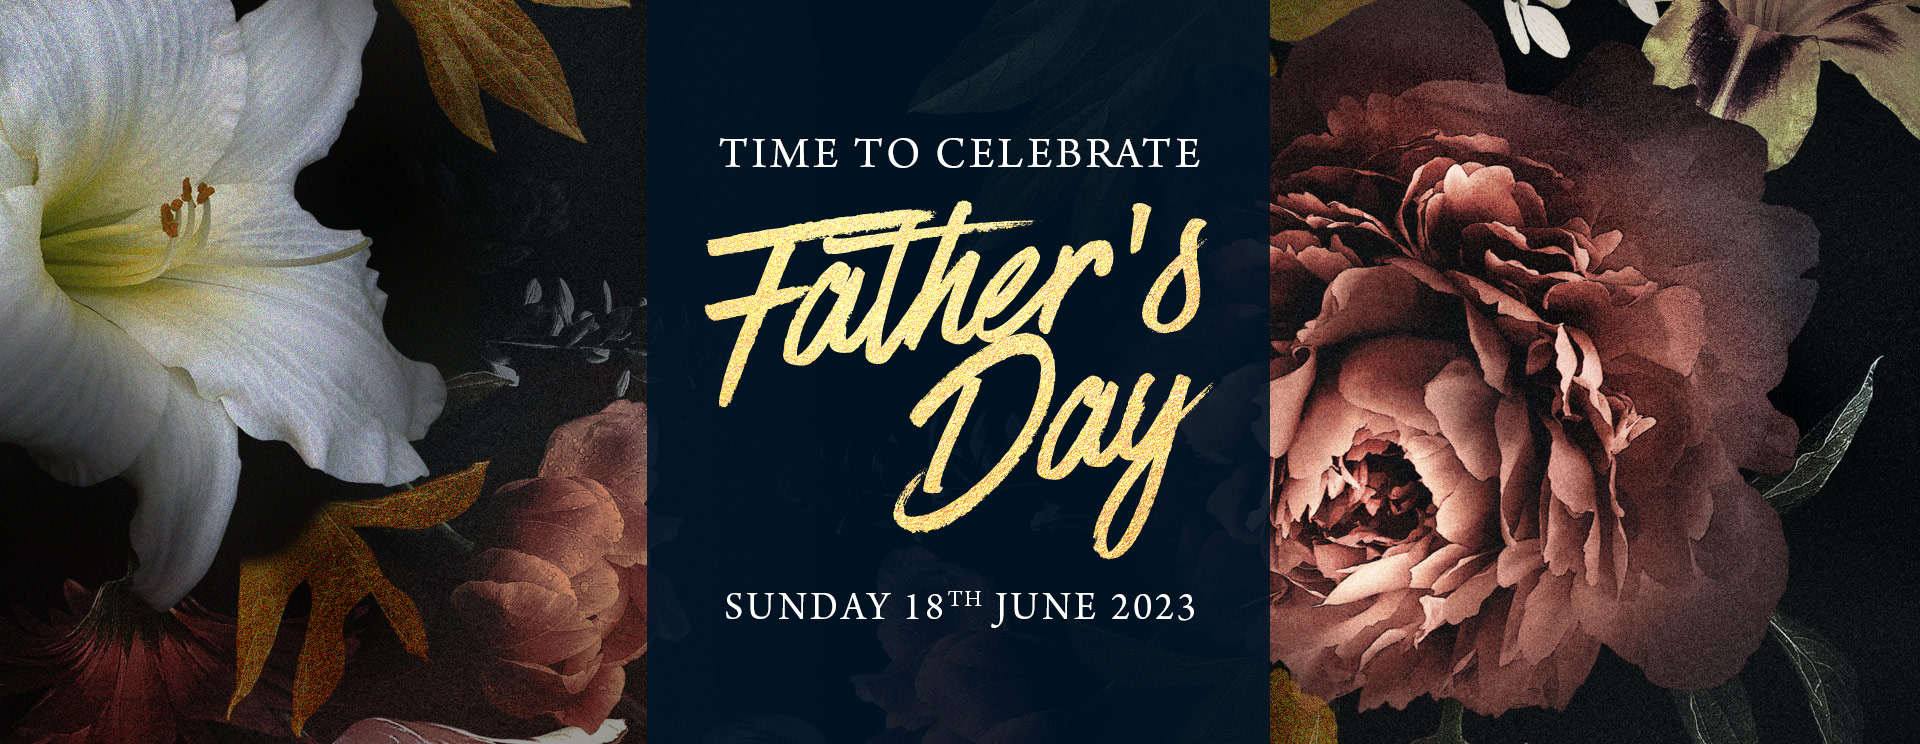 Fathers Day at The Victoria